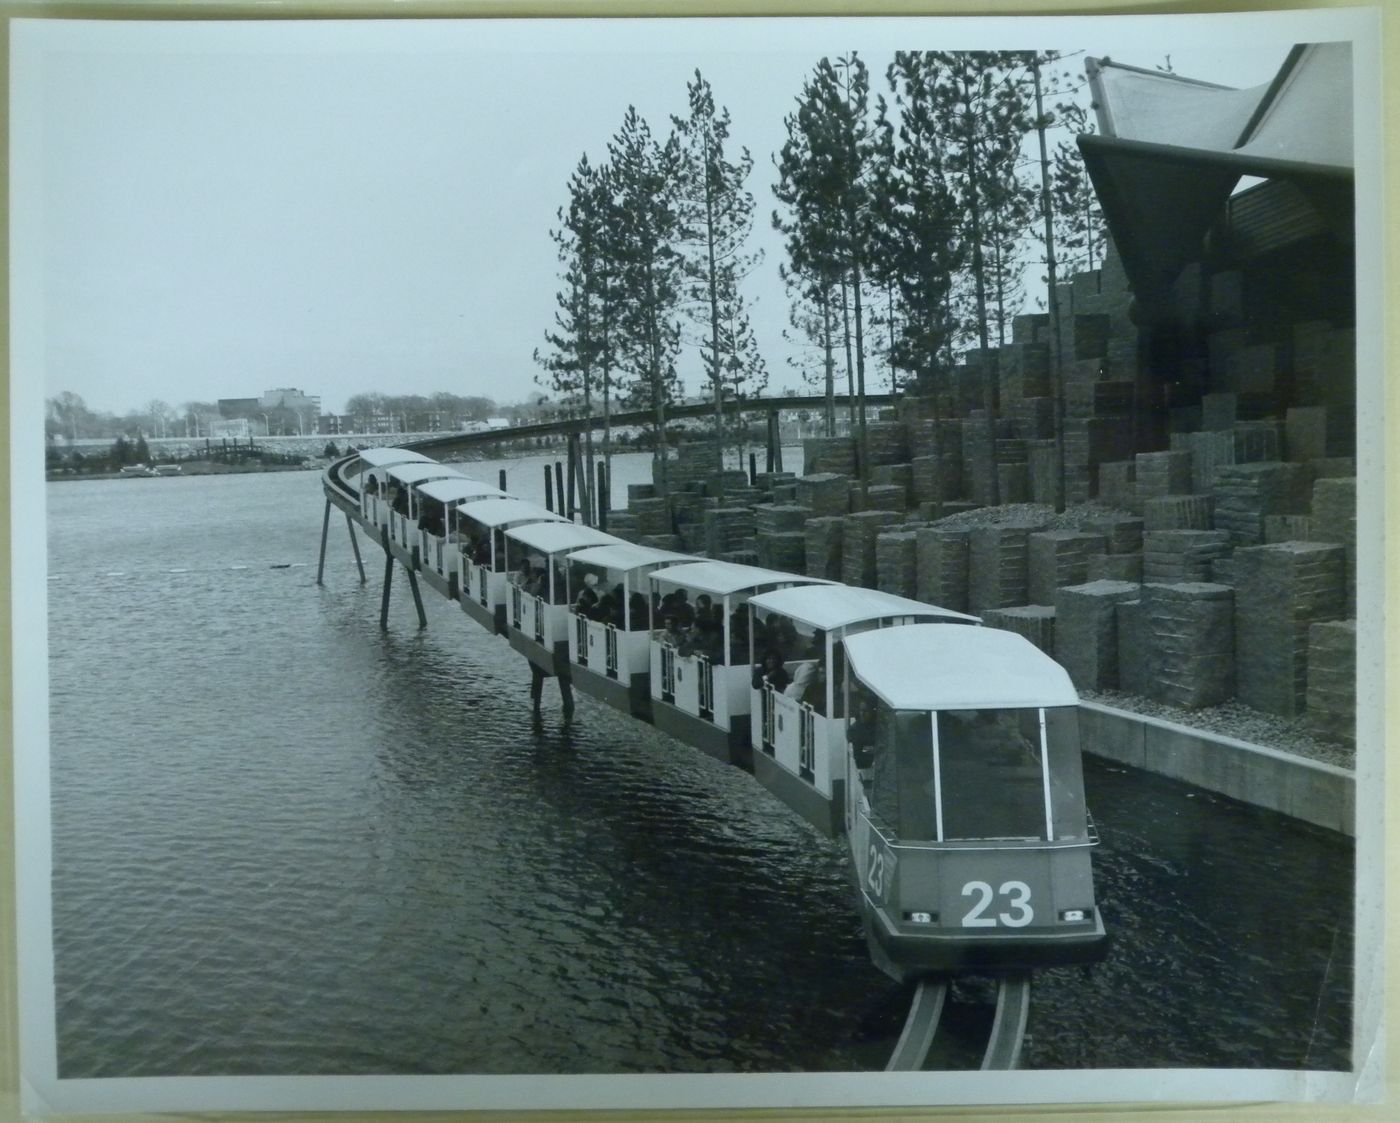 View of the minirail above water near the granite base of the Ontario Pavilion, Expo 67, Montréal, Québec